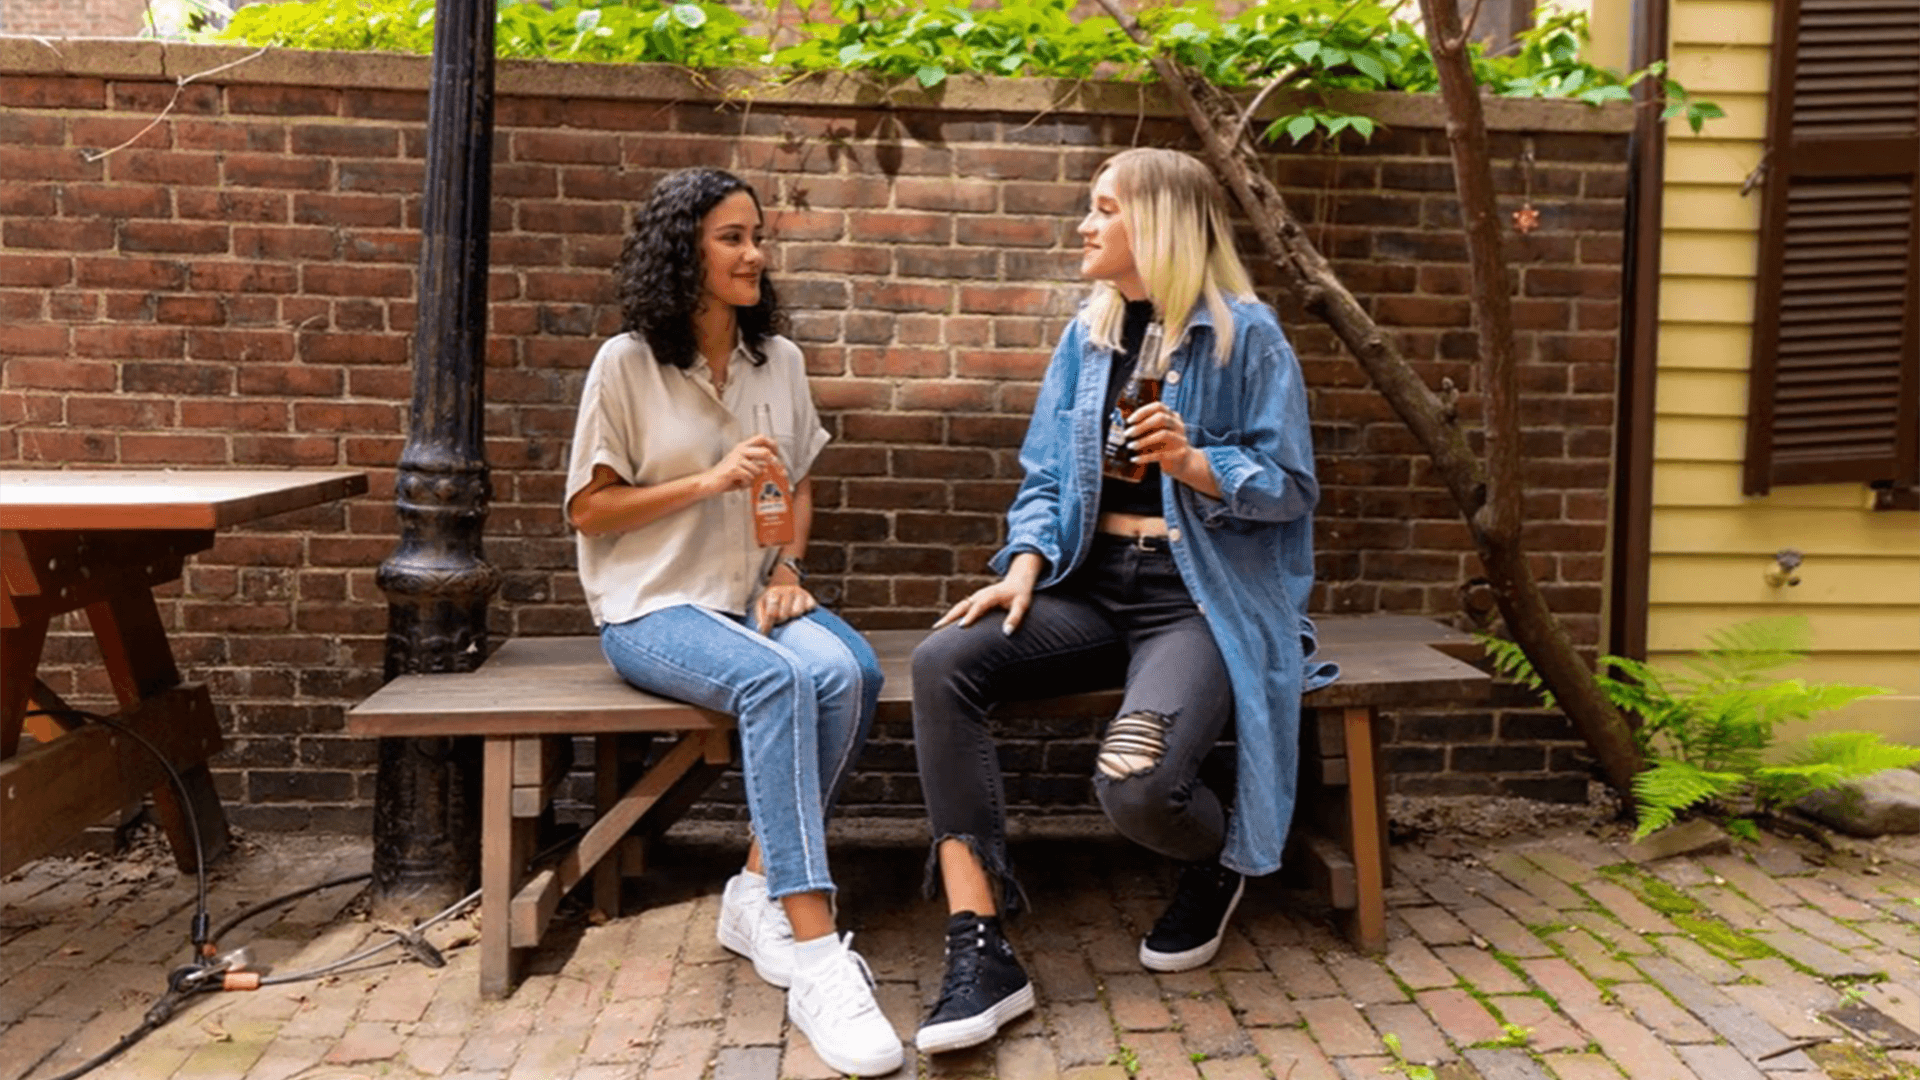 Two young women on bench talking